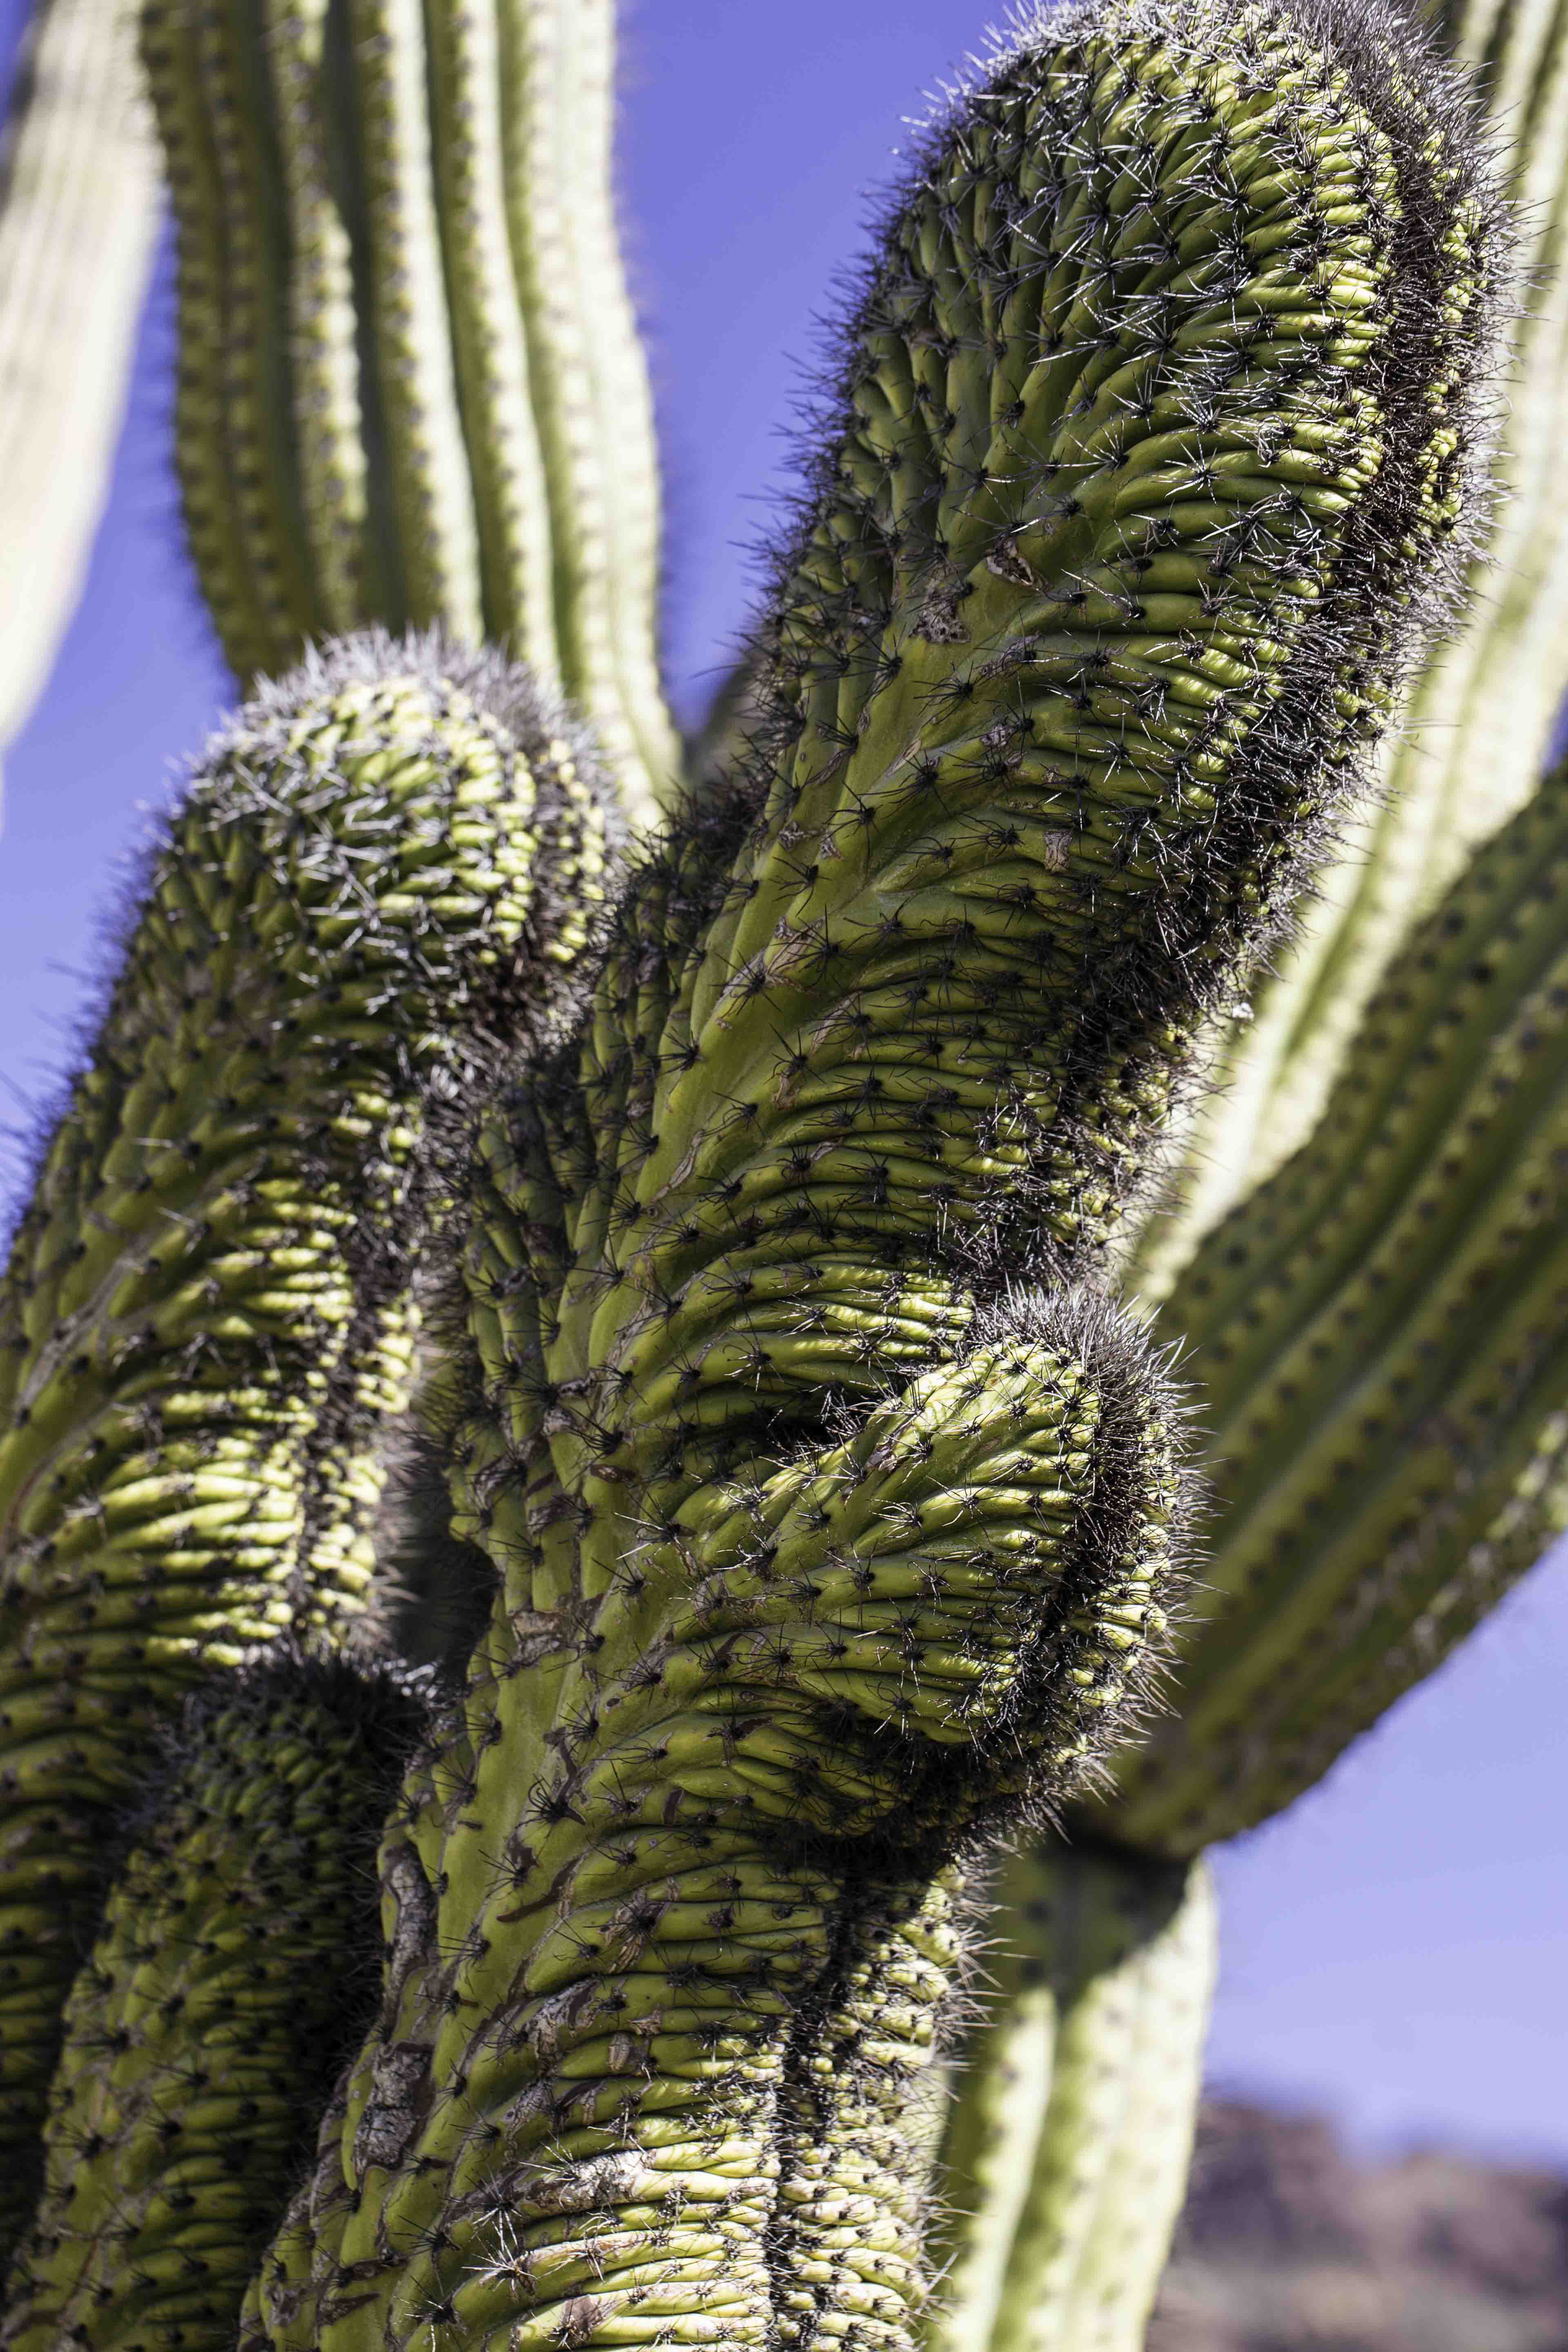 You are currently viewing Organ Pipe Cactus National Monument